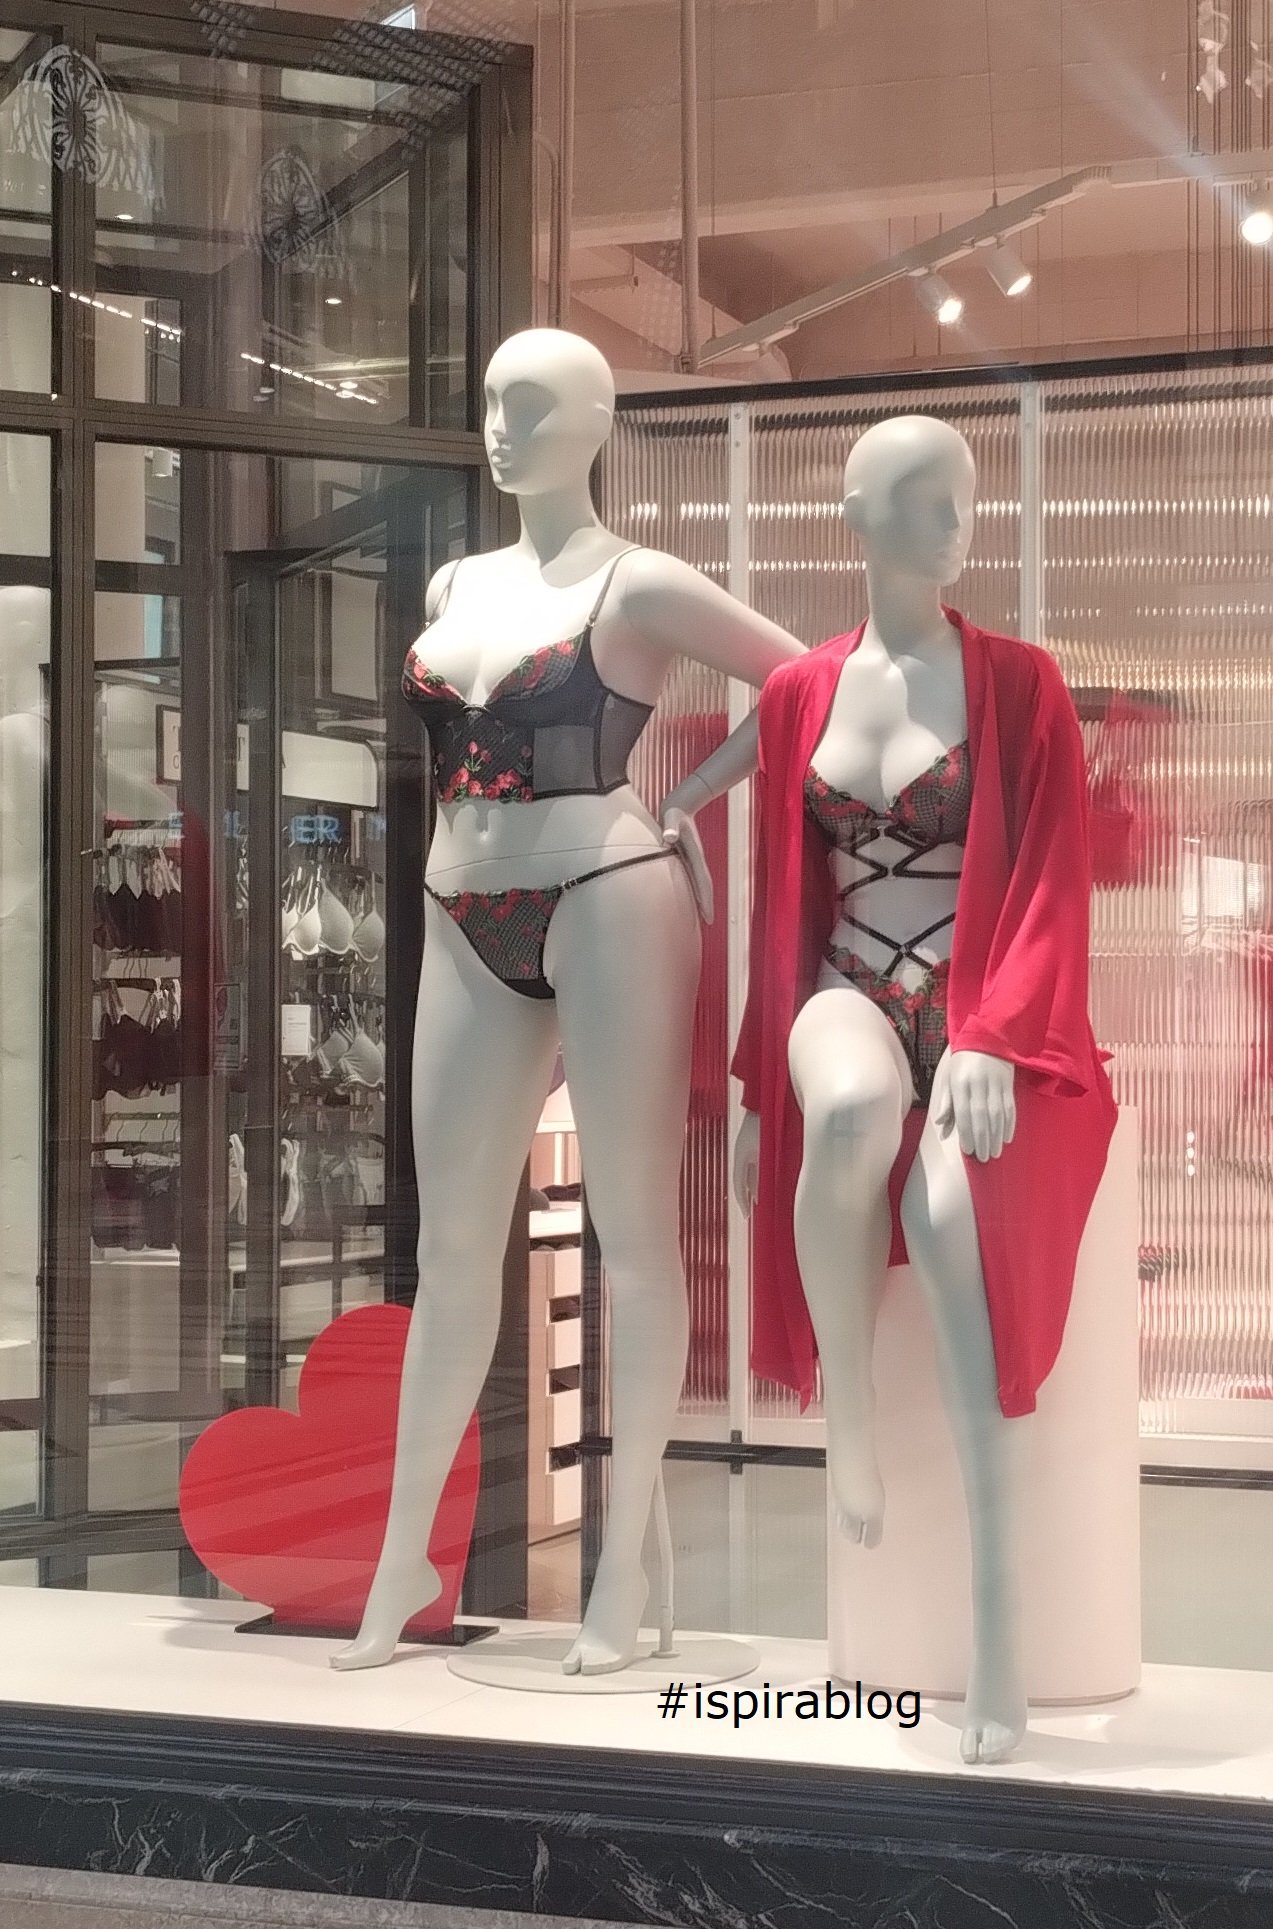 Victoria's Secret lingerie for sale in Turin, Italy